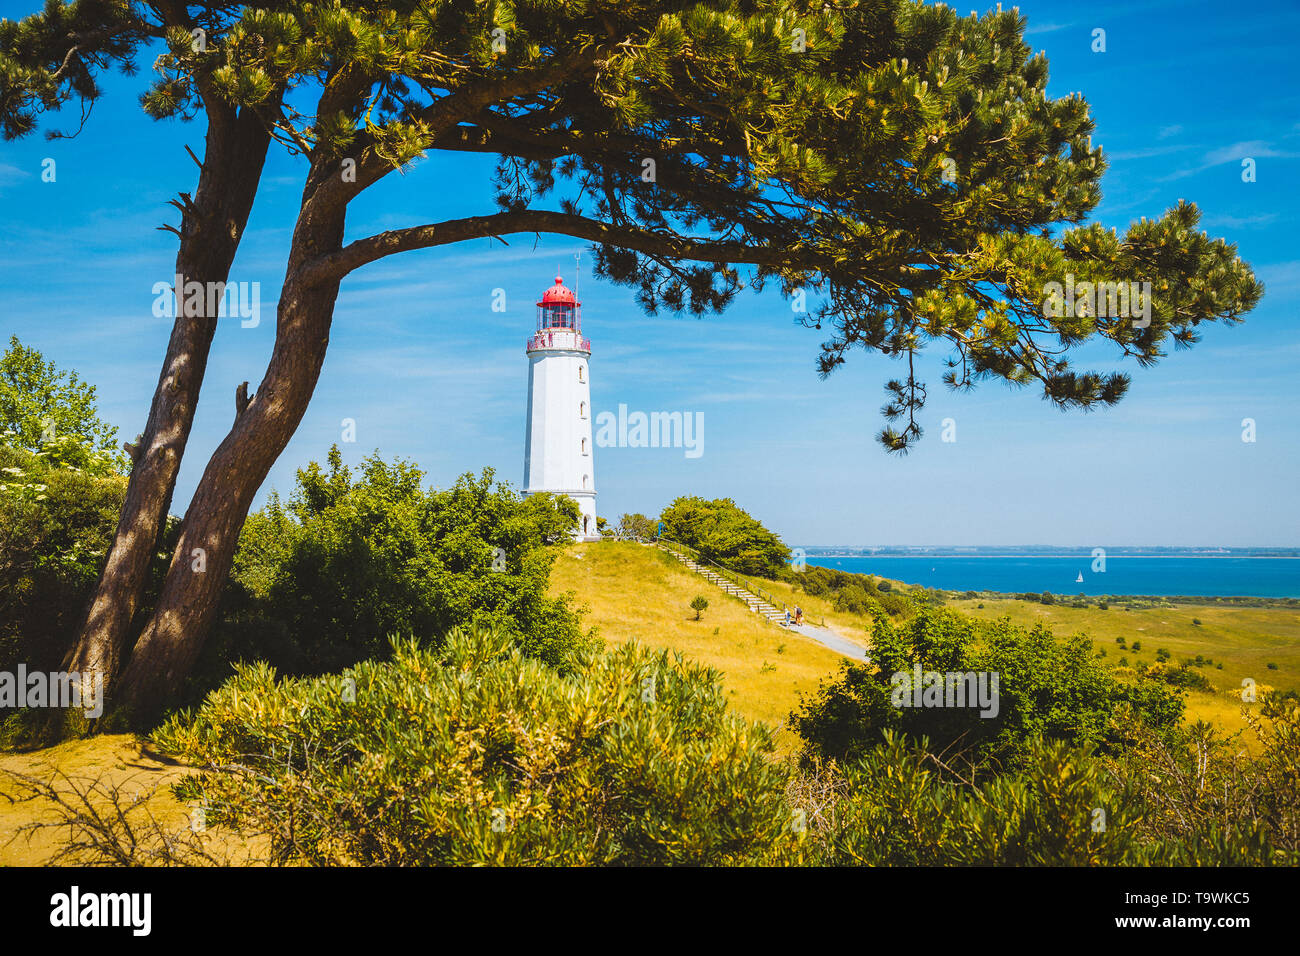 Gamous Lighthouse Dornbusch on the beautiful island Hiddensee with blooming flowers in summer, Baltic Sea, Mecklenburg-Vorpommern, Germany Stock Photo